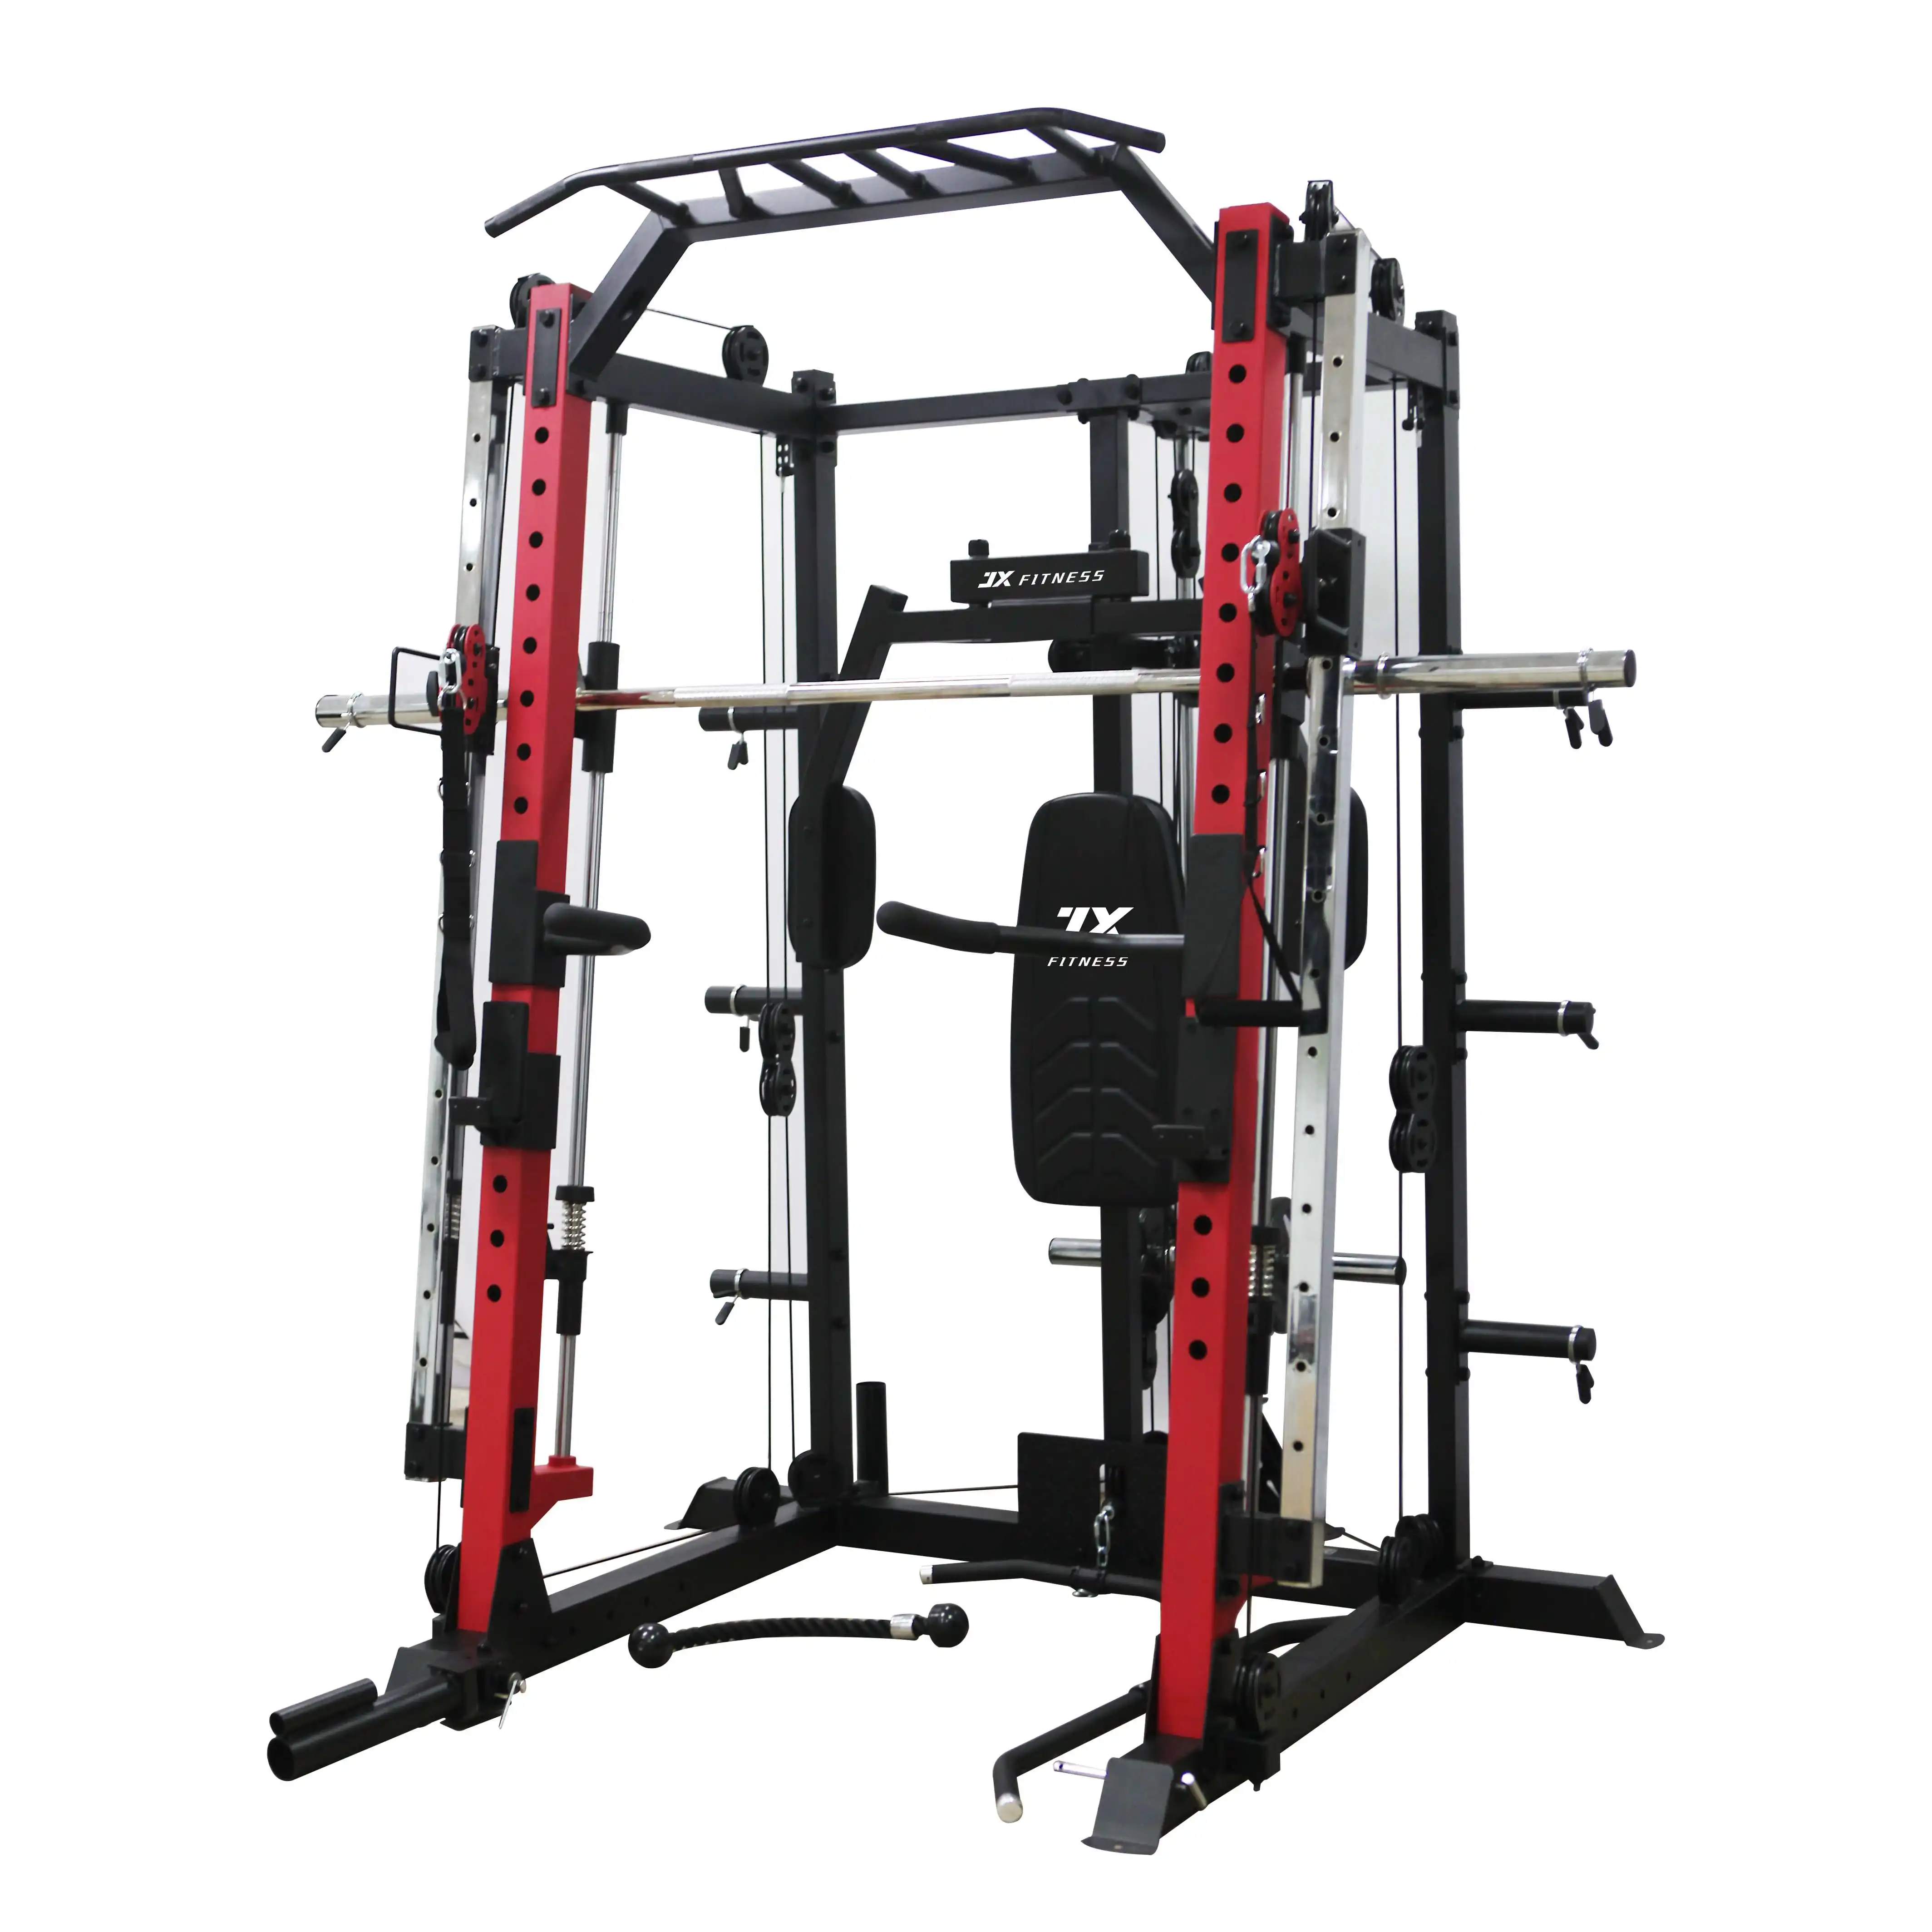 Gym Fullset Equipped Multi Functional Equipment Training Cable Machine Squat Power Rack Smith Smith Cage Machine